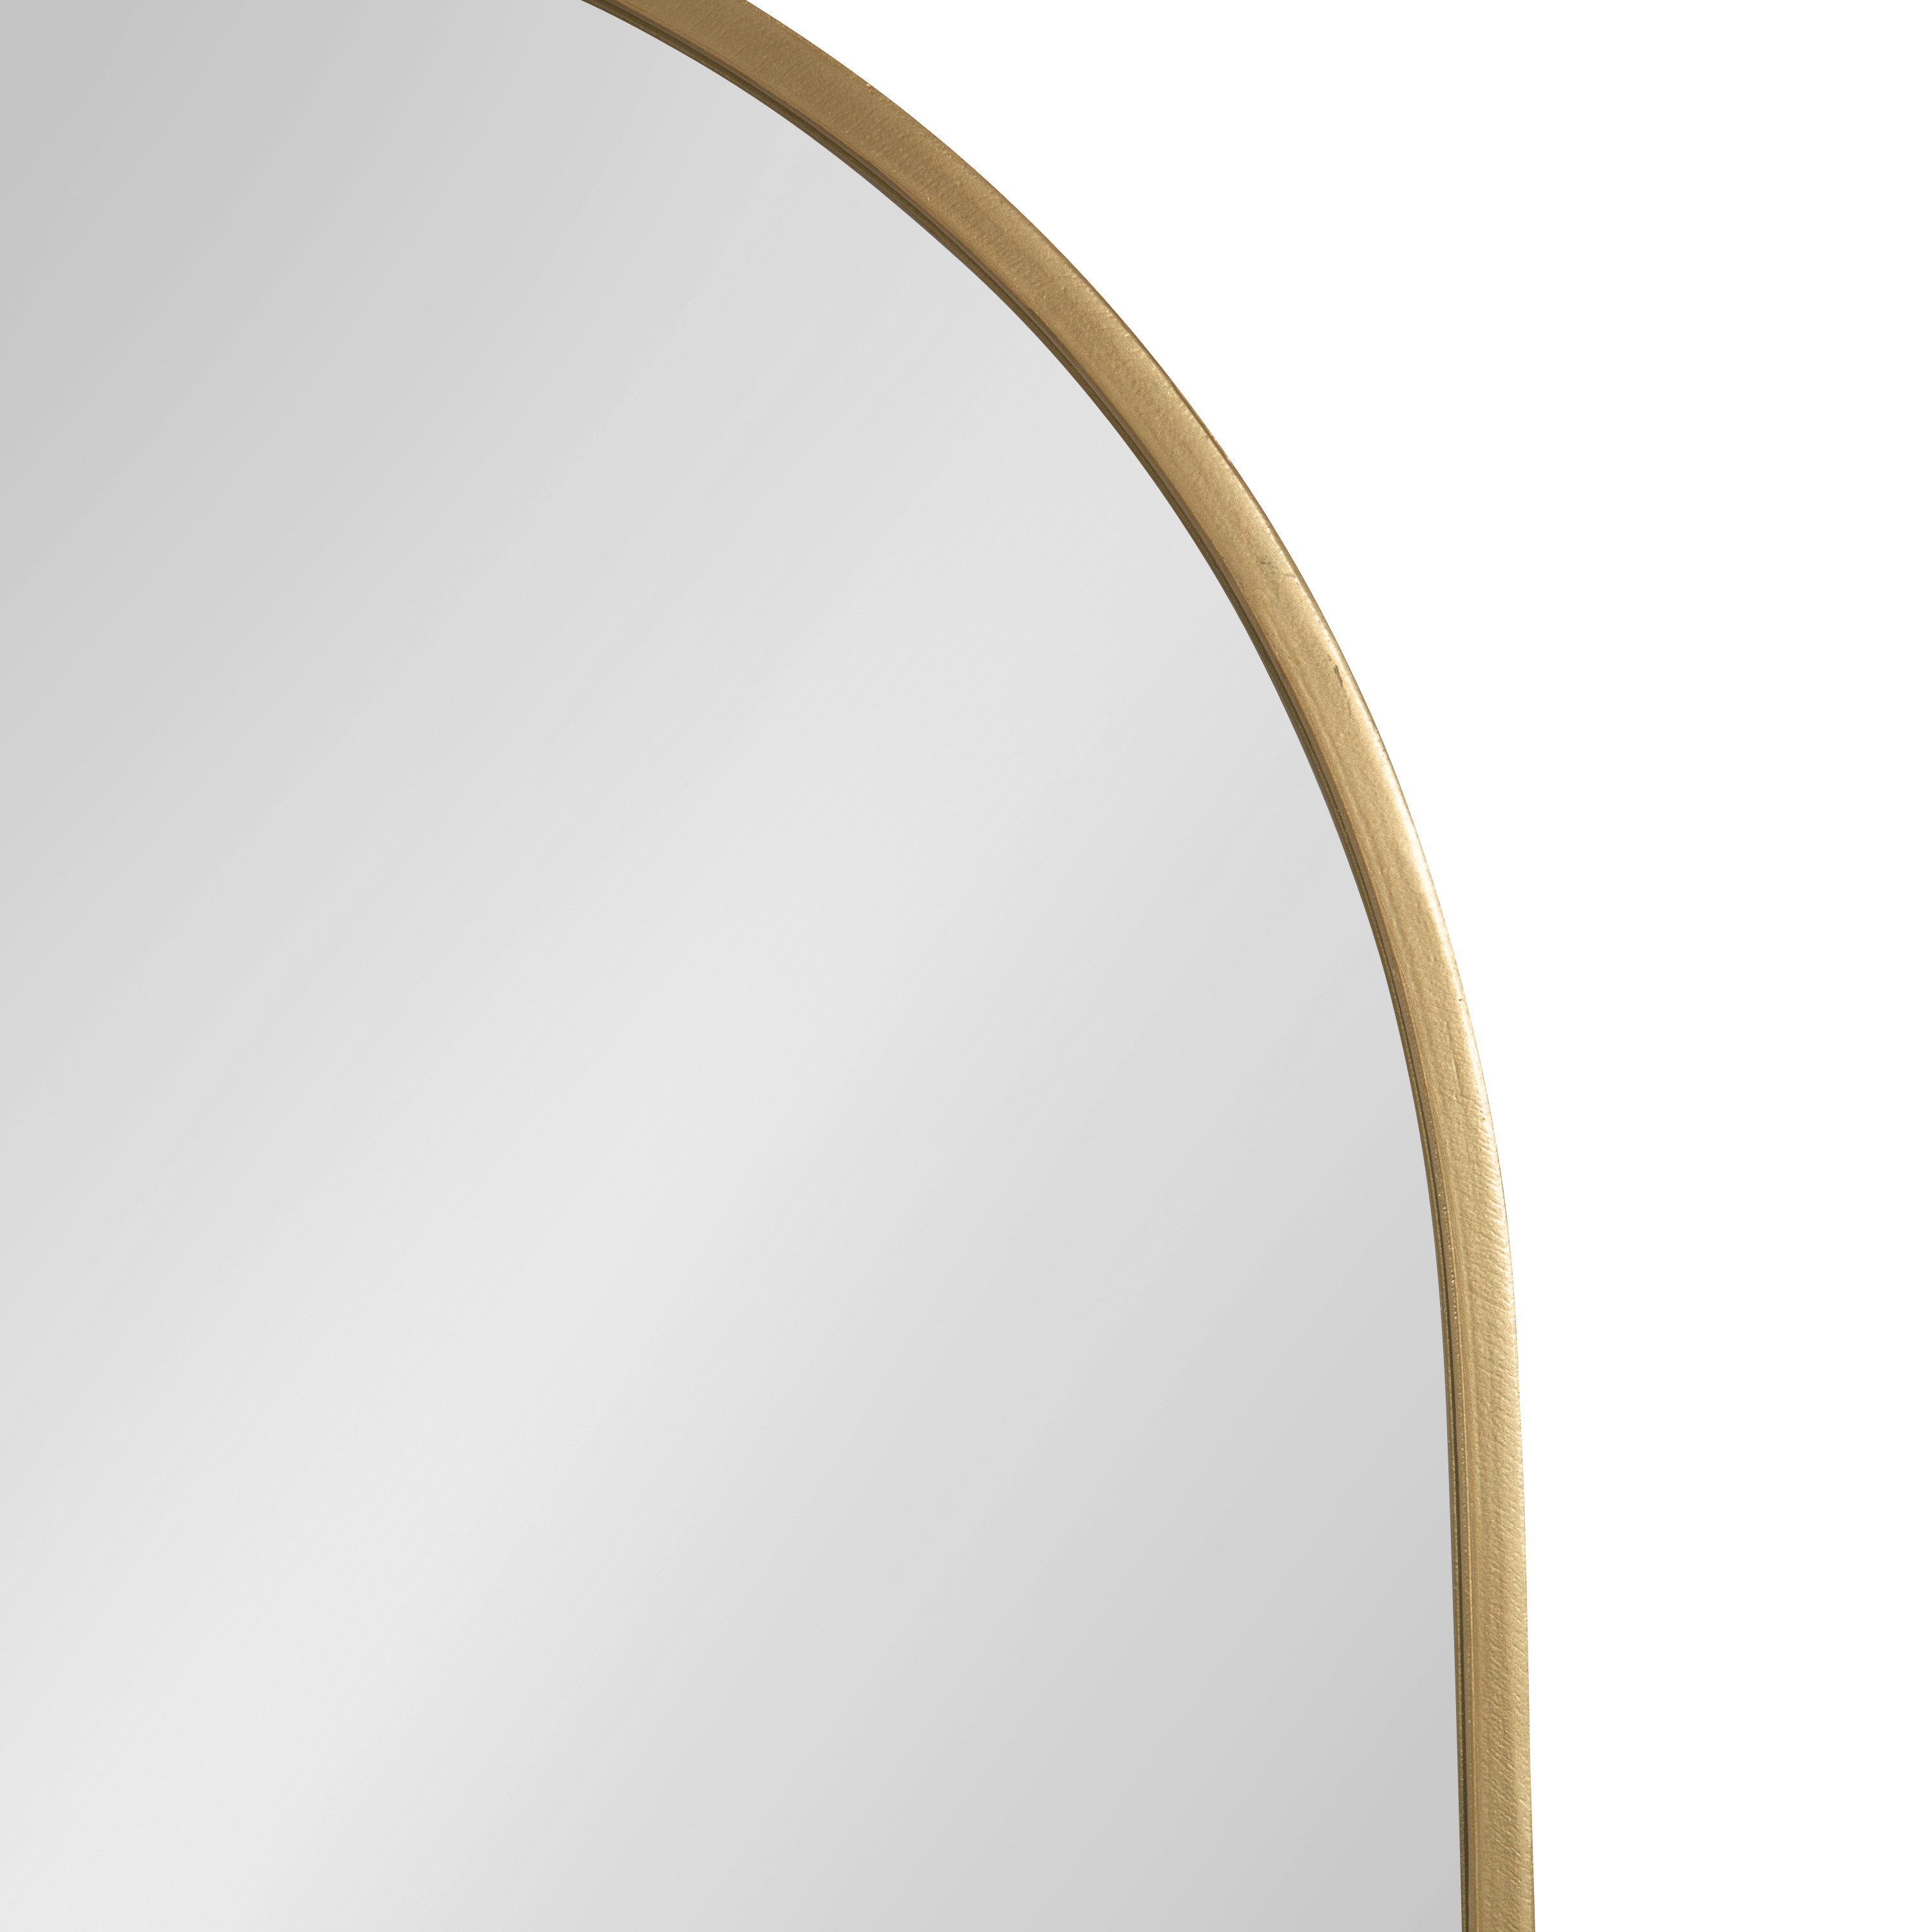 Kate and Laurel Schuyler Arched Wall Mirror with Hooks, 20 x 31, Gold and  Natural Wood, Decorative Modern Mirror with Hooks for Storage and Display 